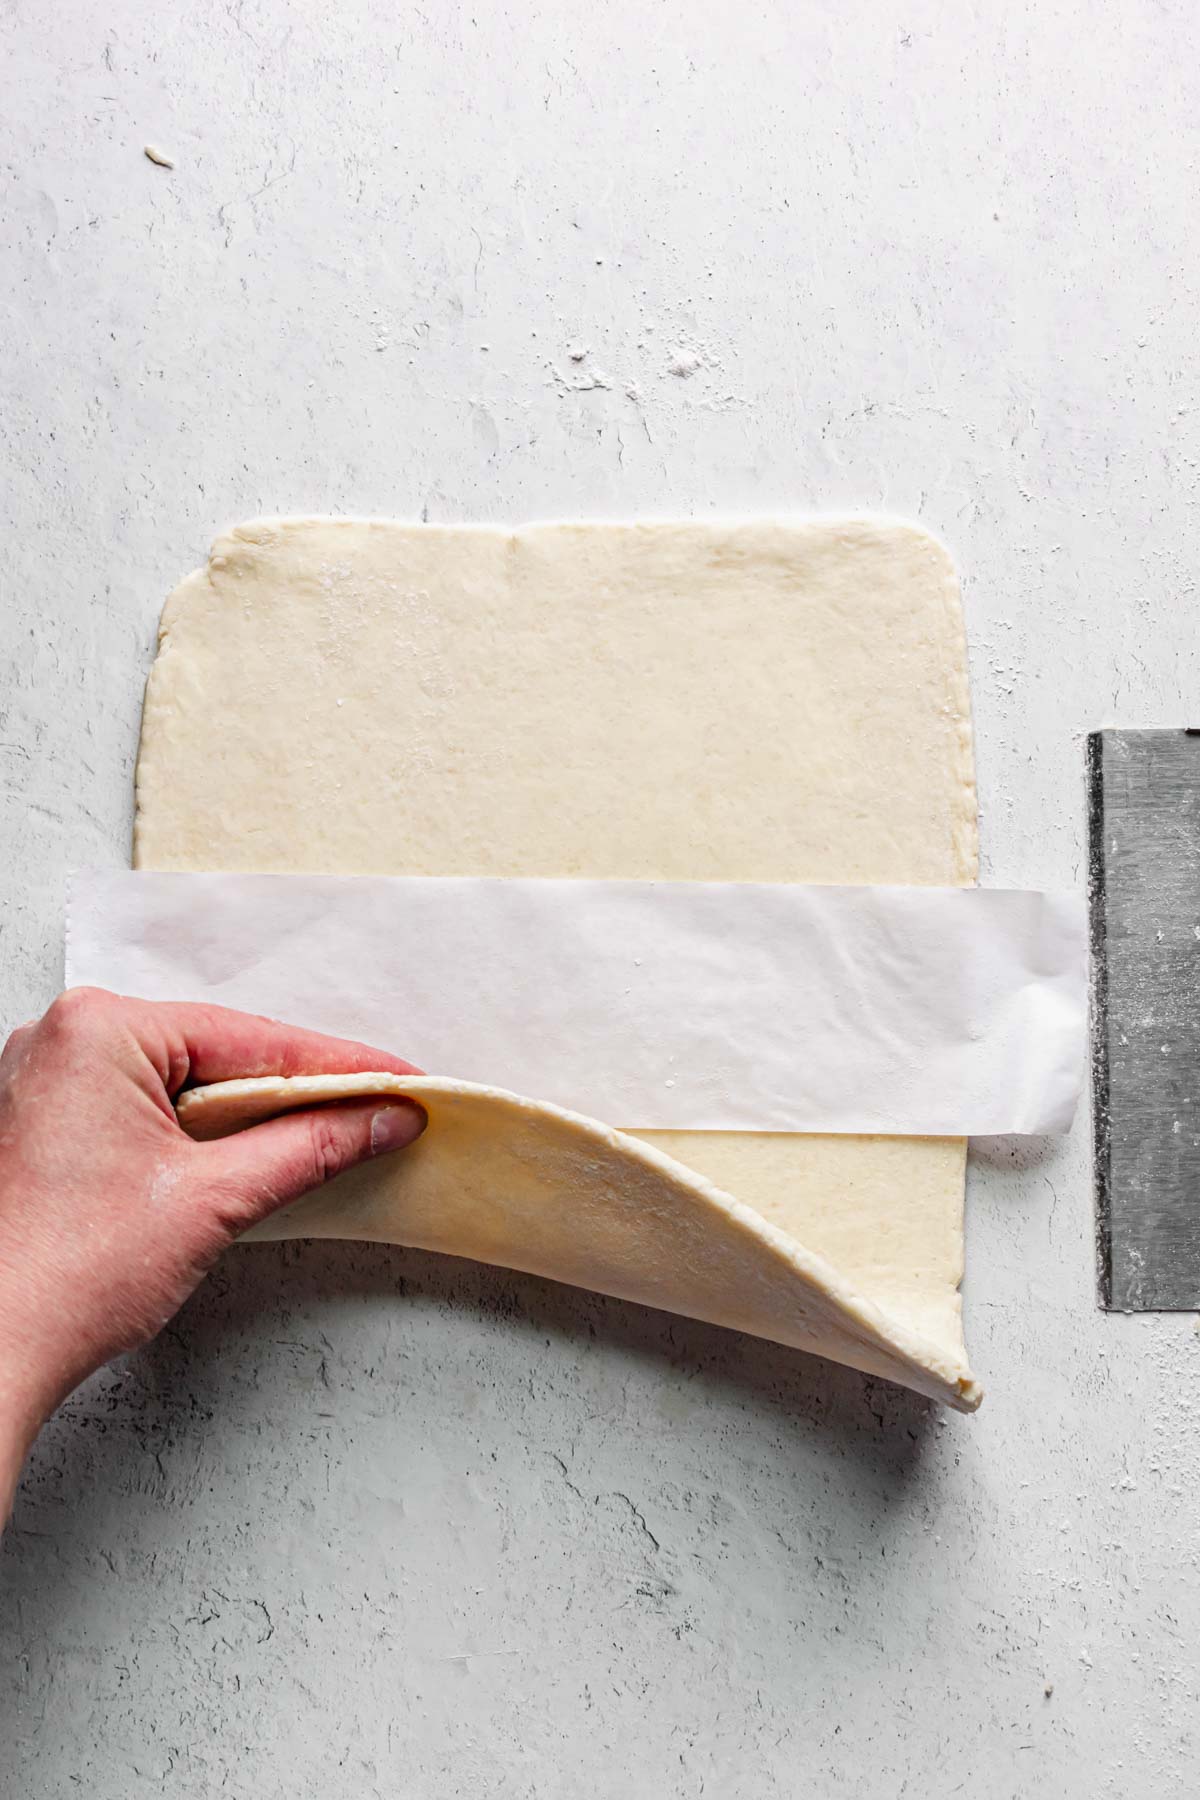 A strip of parchment paper is added to the center of the rolled out dough.